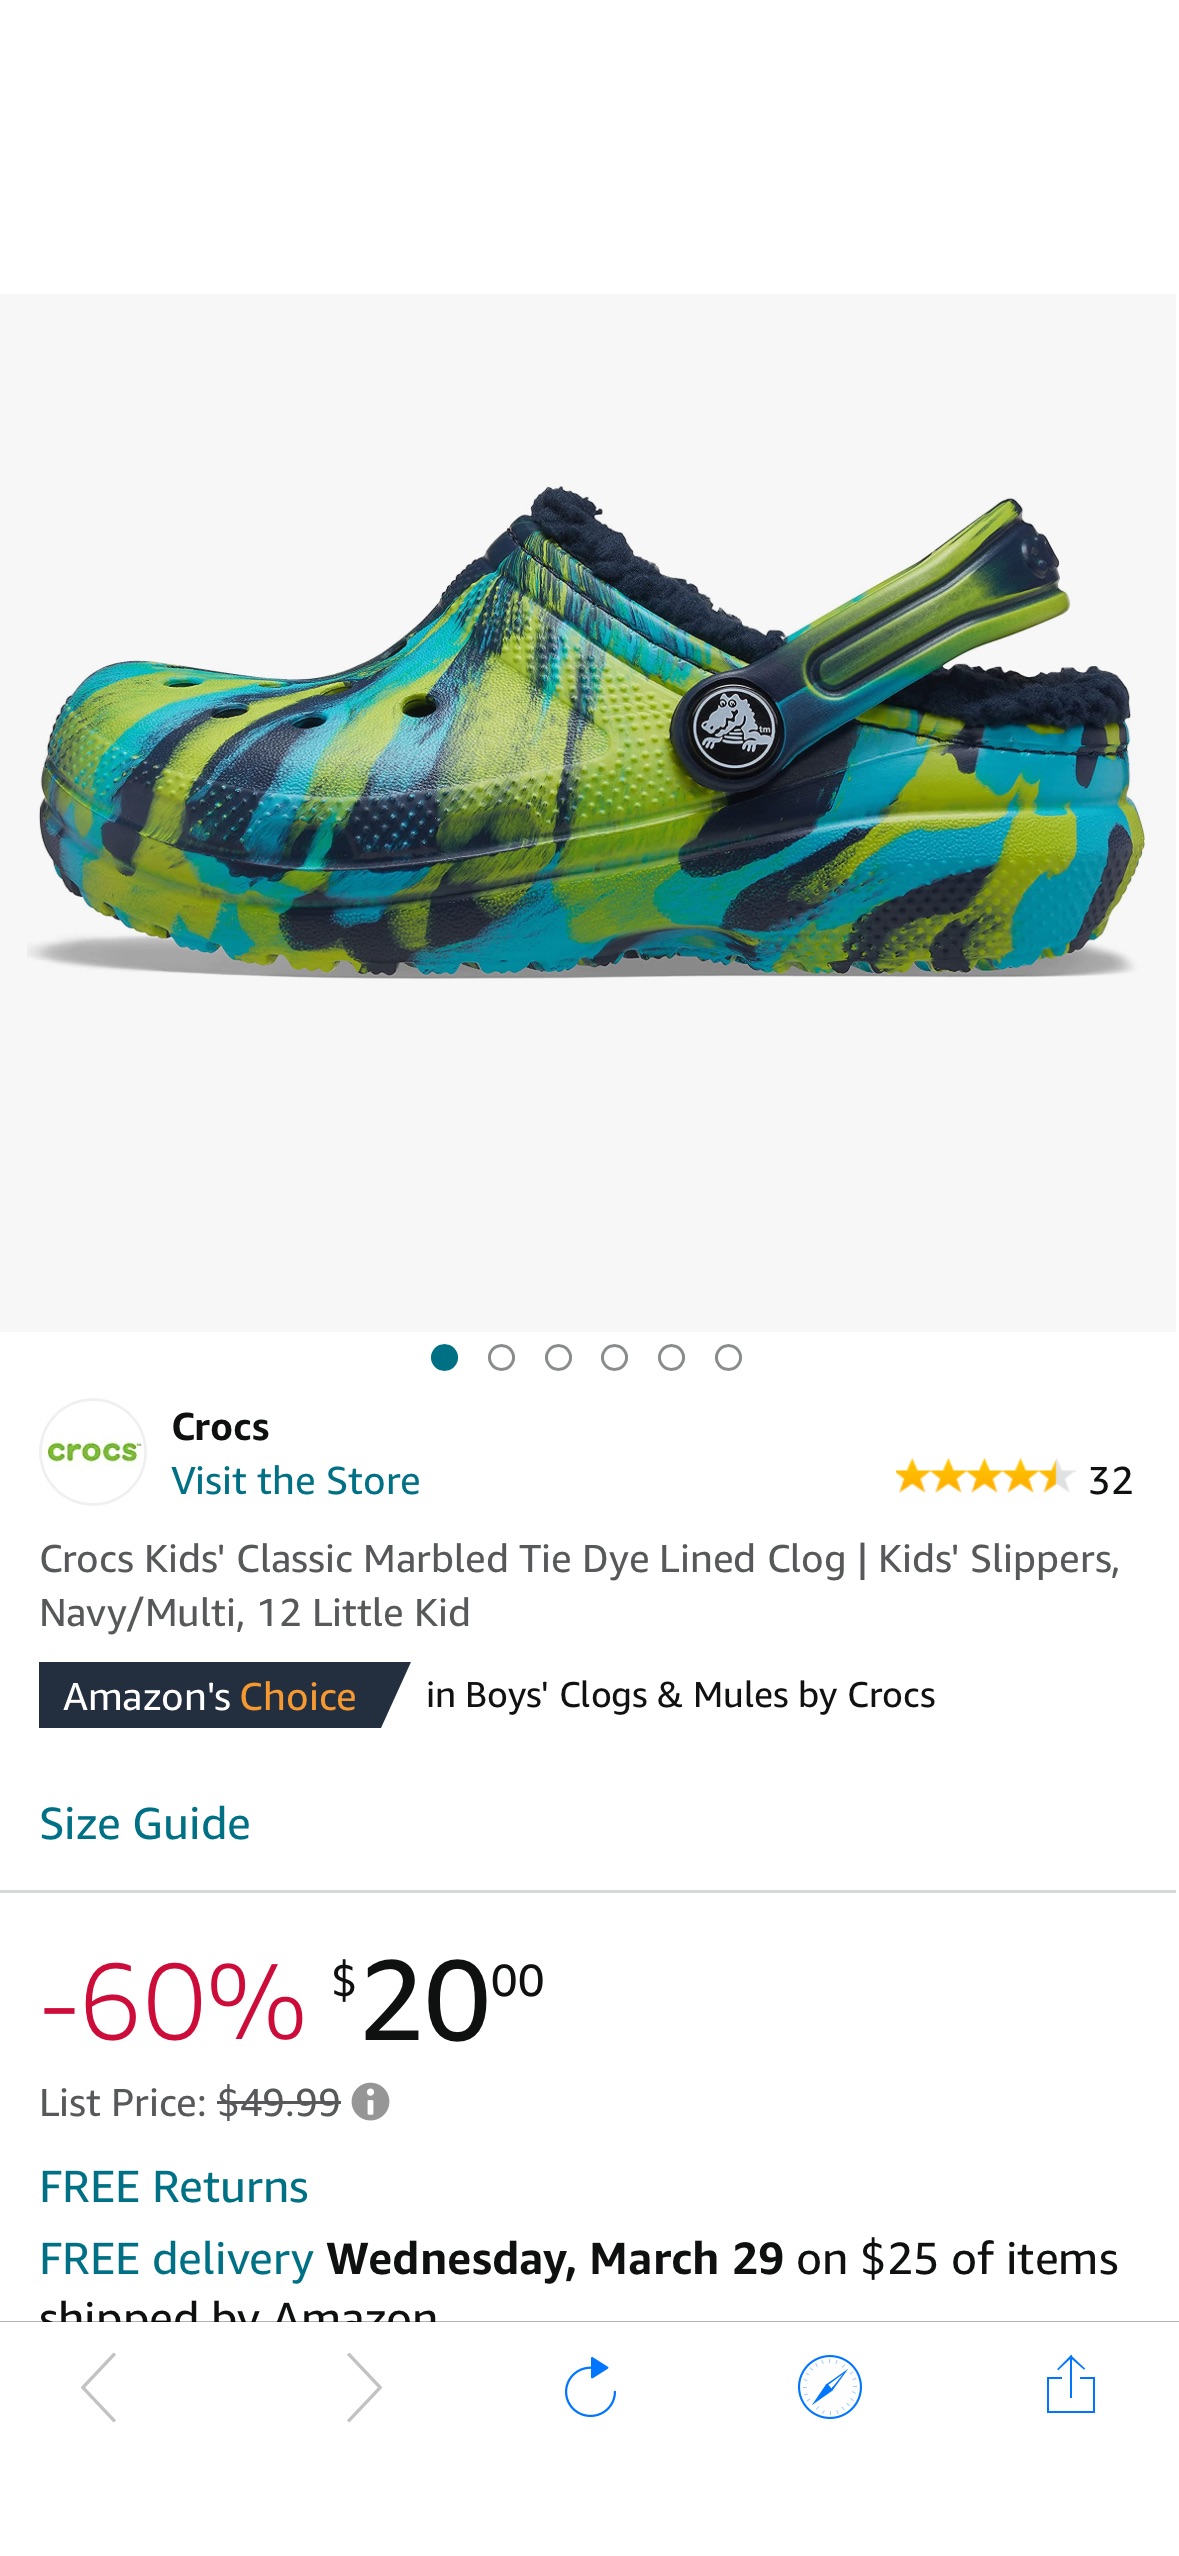 Amazon.com: Crocs Kids' Classic Marbled Tie Dye Lined Clog | Kids' Slippers, Navy/Multi, 12 Little Kid : Clothing, Shoes & Jewelry